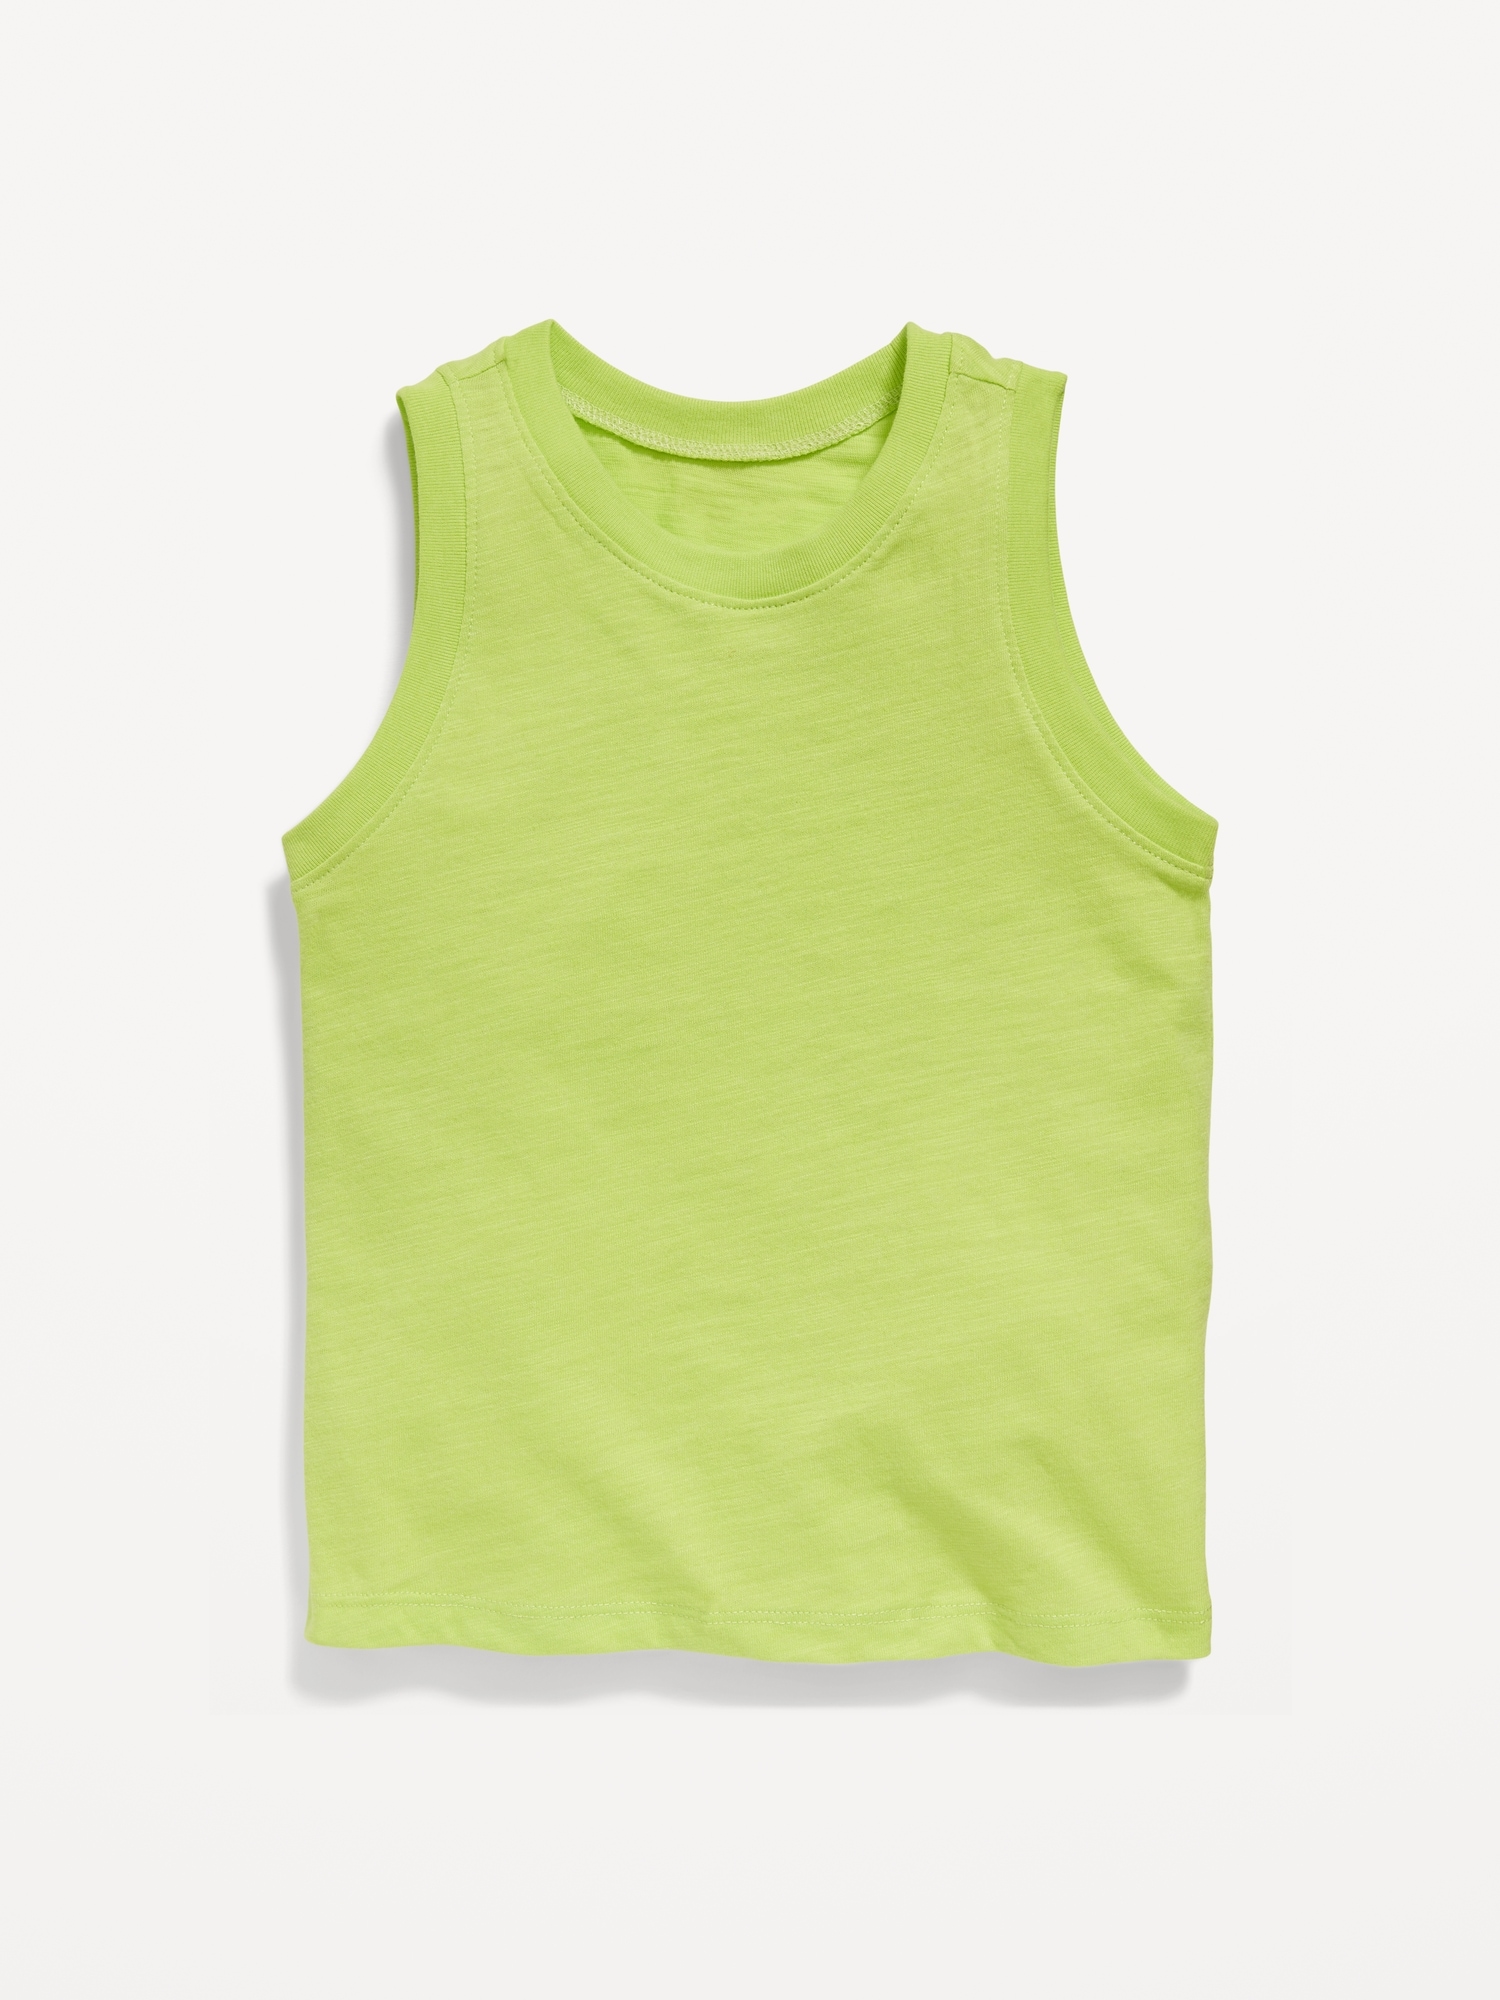 Old Navy Unisex Solid Tank Top for Toddler green. 1